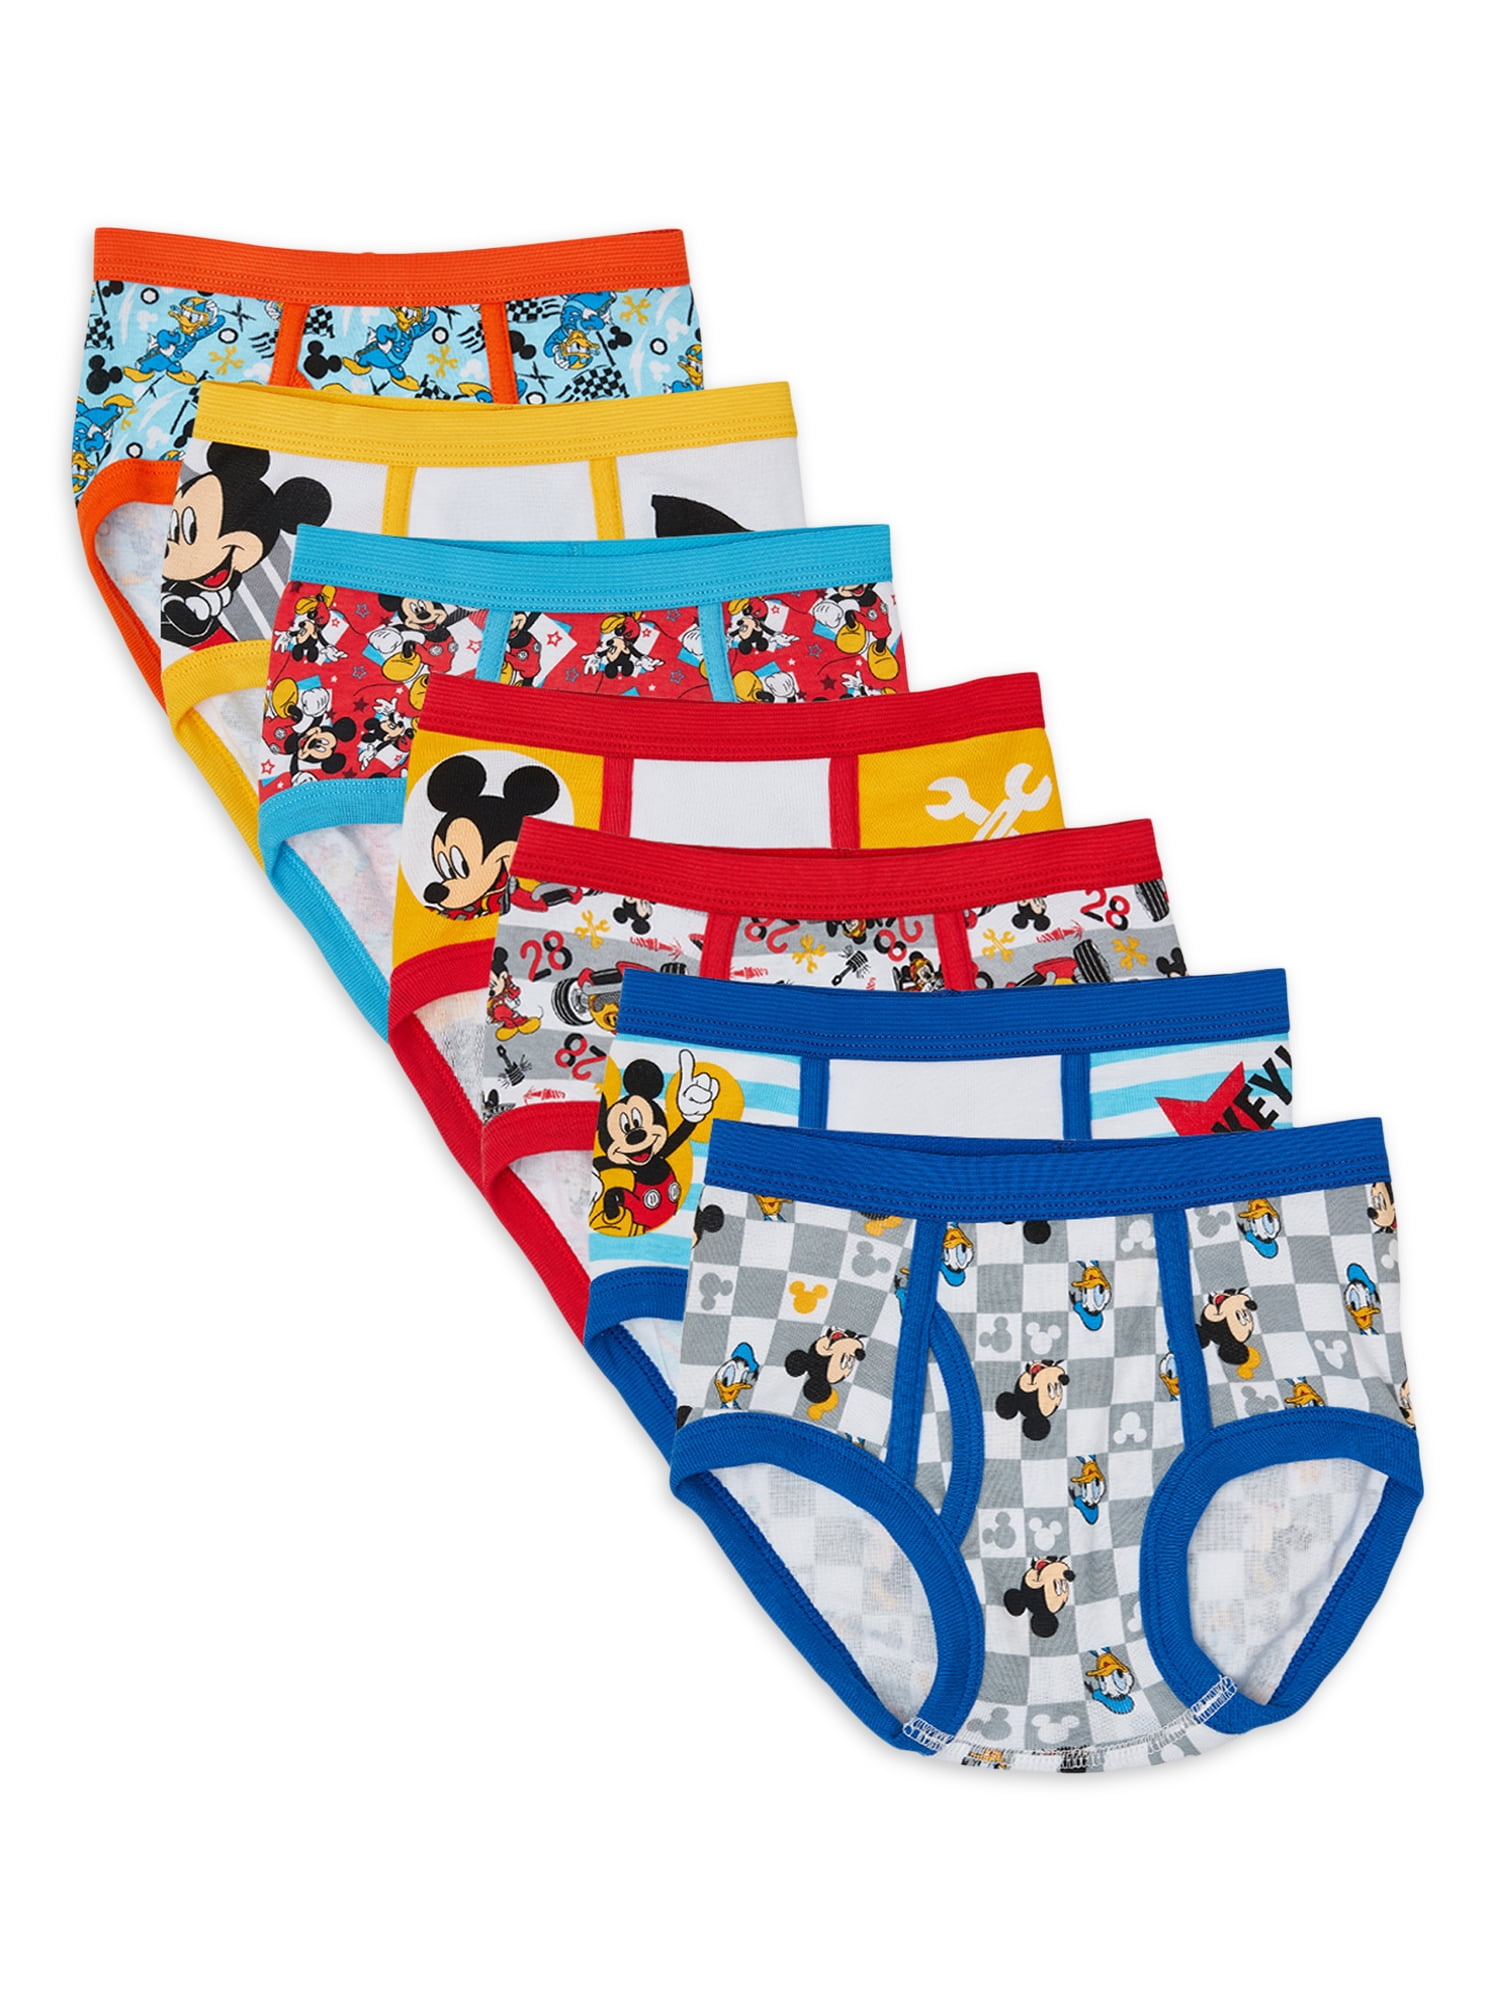 Mickey Mouse Toddler Boy Briefs, 7-Pack, Sizes 2T-4T